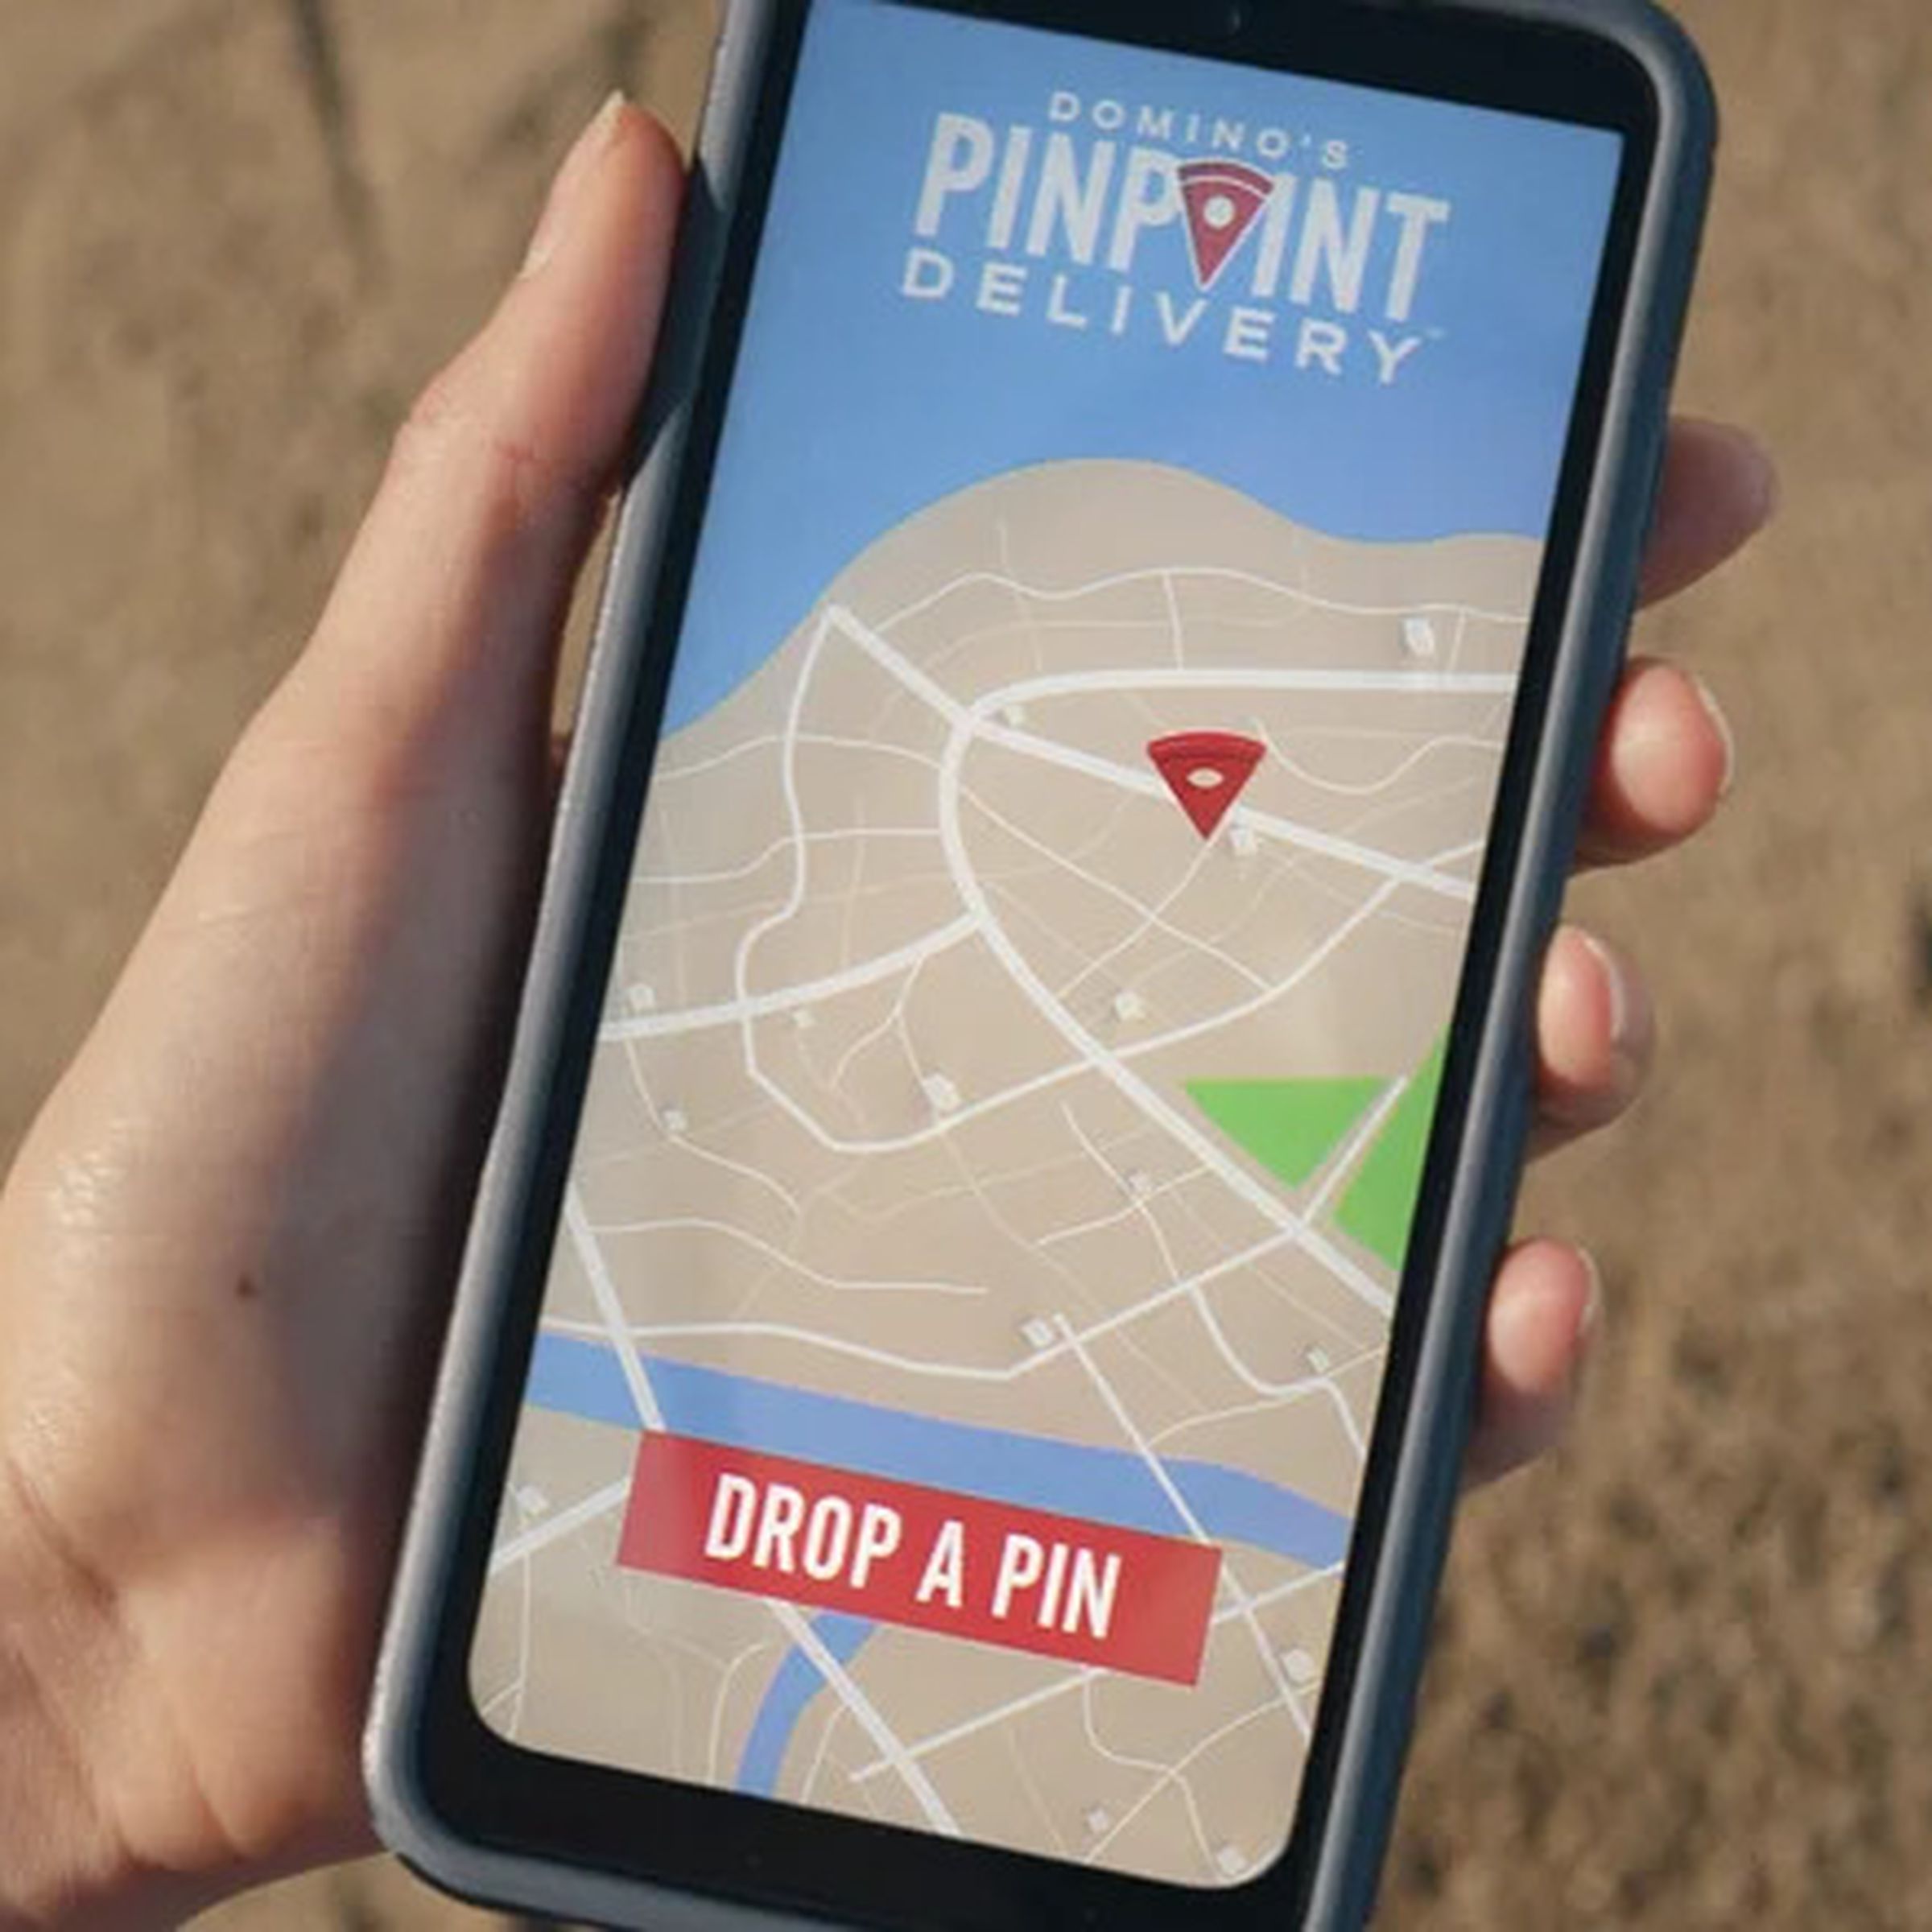 A hand holding a smartphone opened to the Domino’s app, with the “Pinpoint Delivery” ordering page visible.